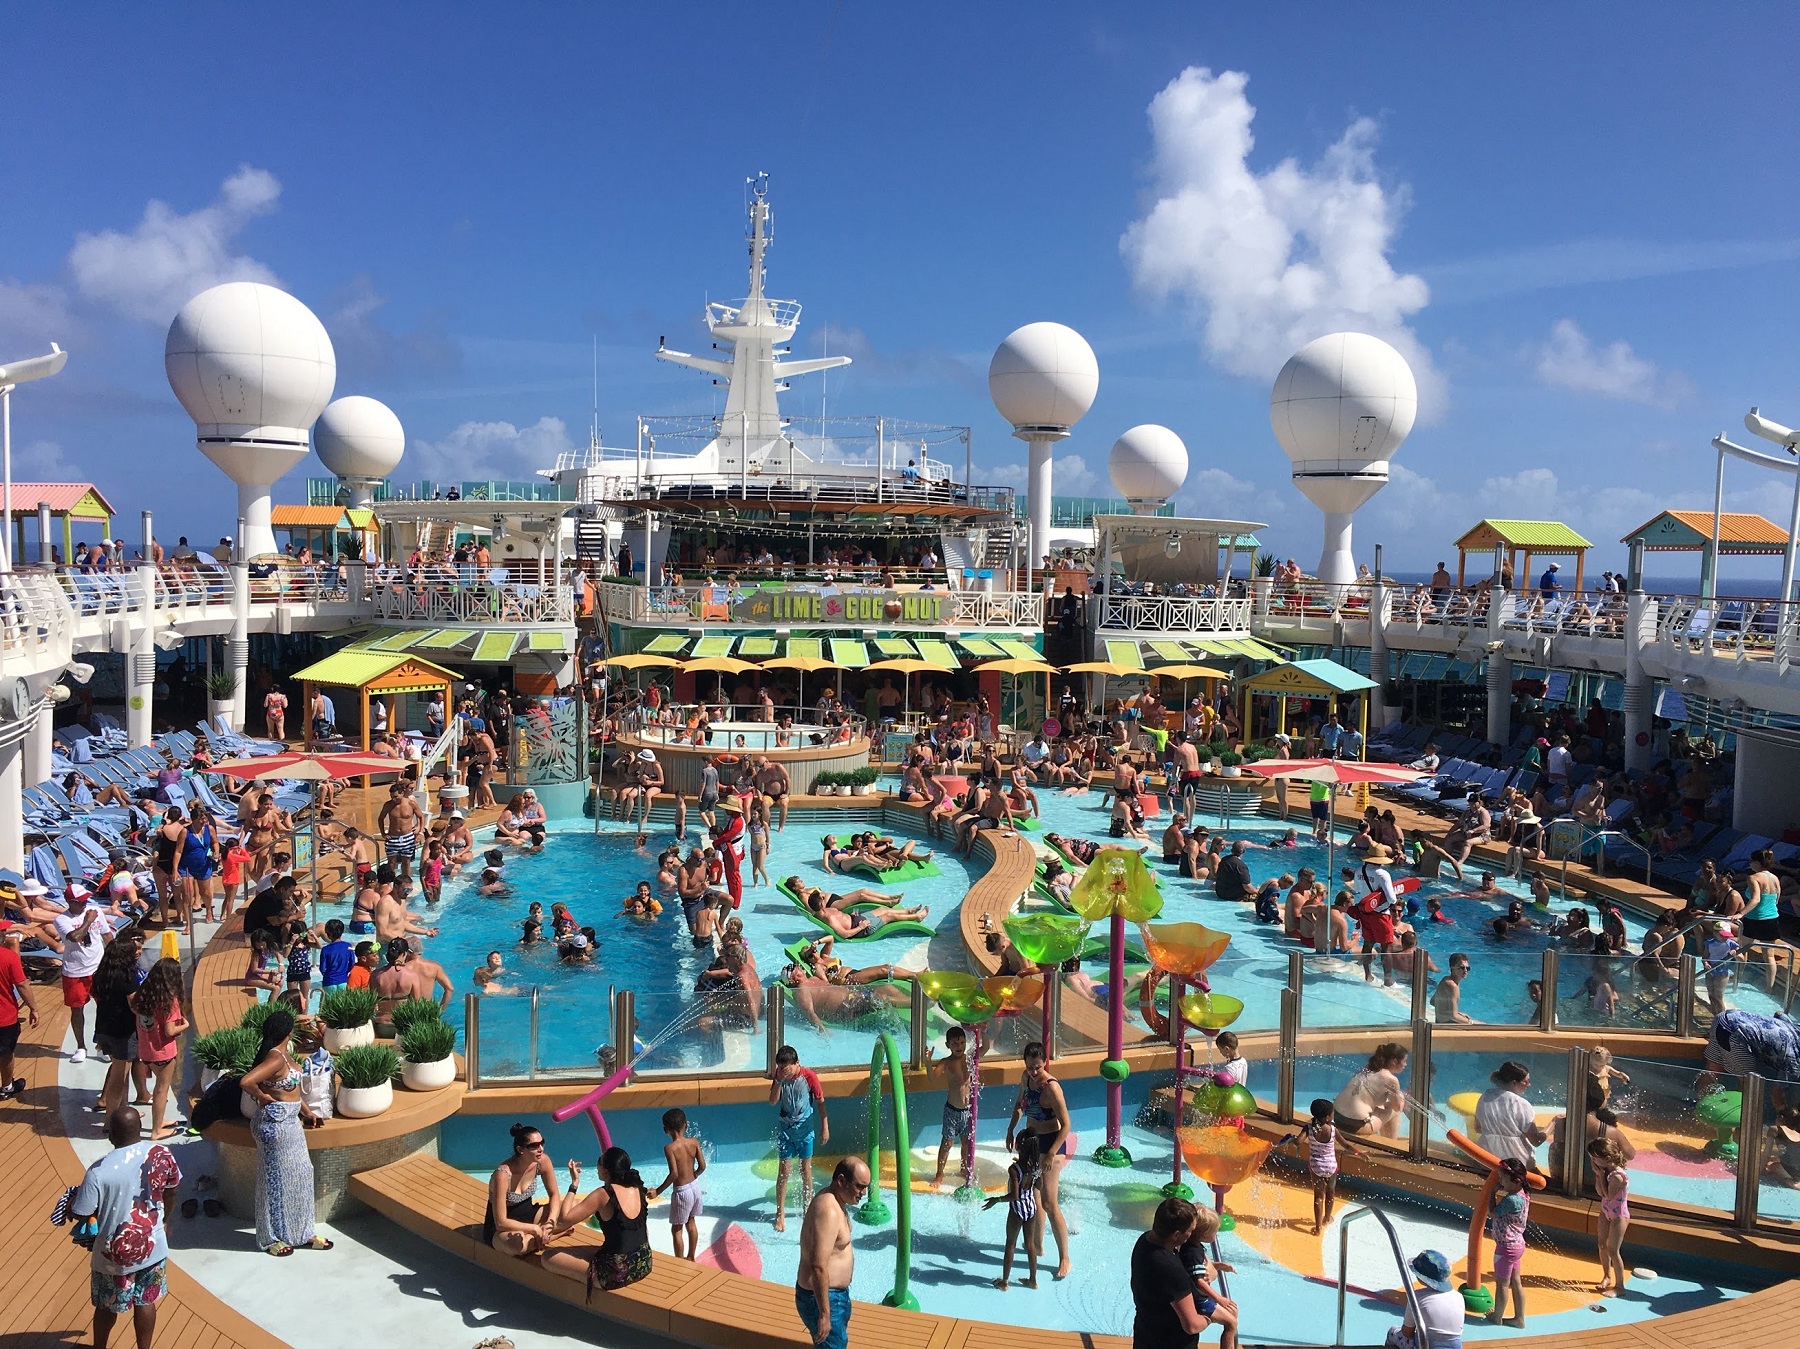 4-Night Royal Caribbean Cruise to the BAHAMAS: Relax and Play in the